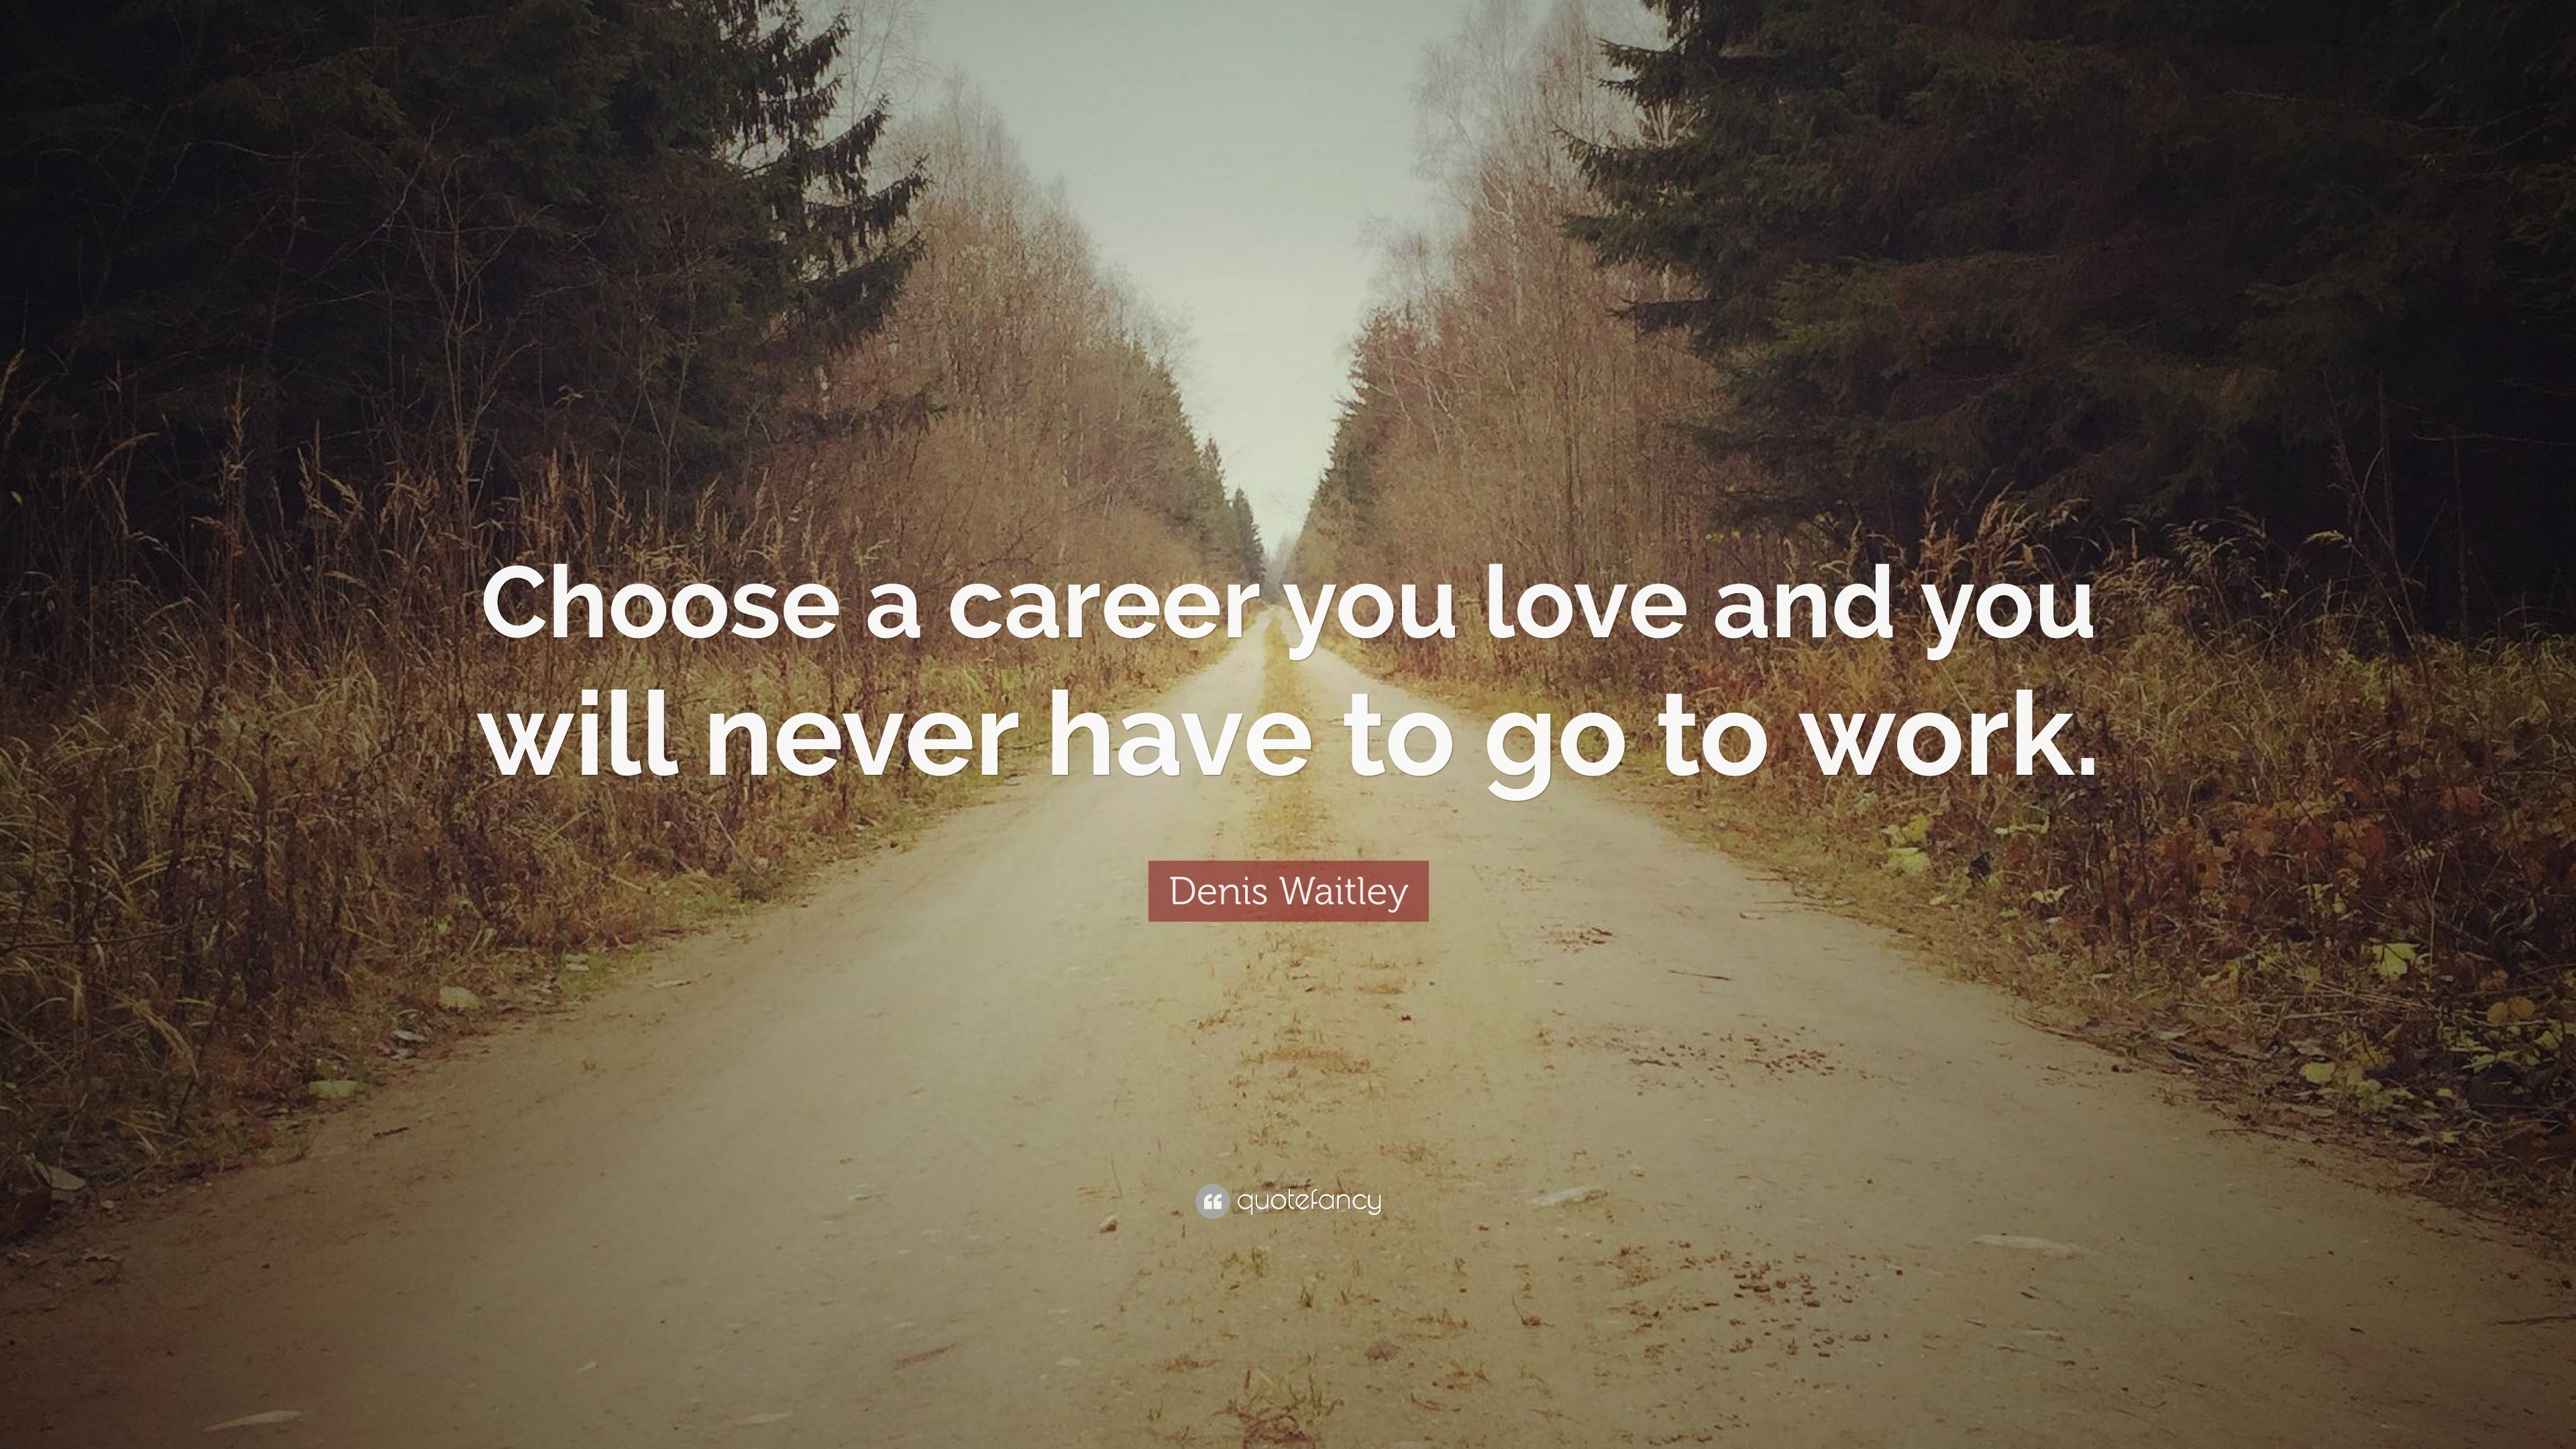 Denis Waitley Quote: “Choose A Career You Love And You Will Never Have To Go To